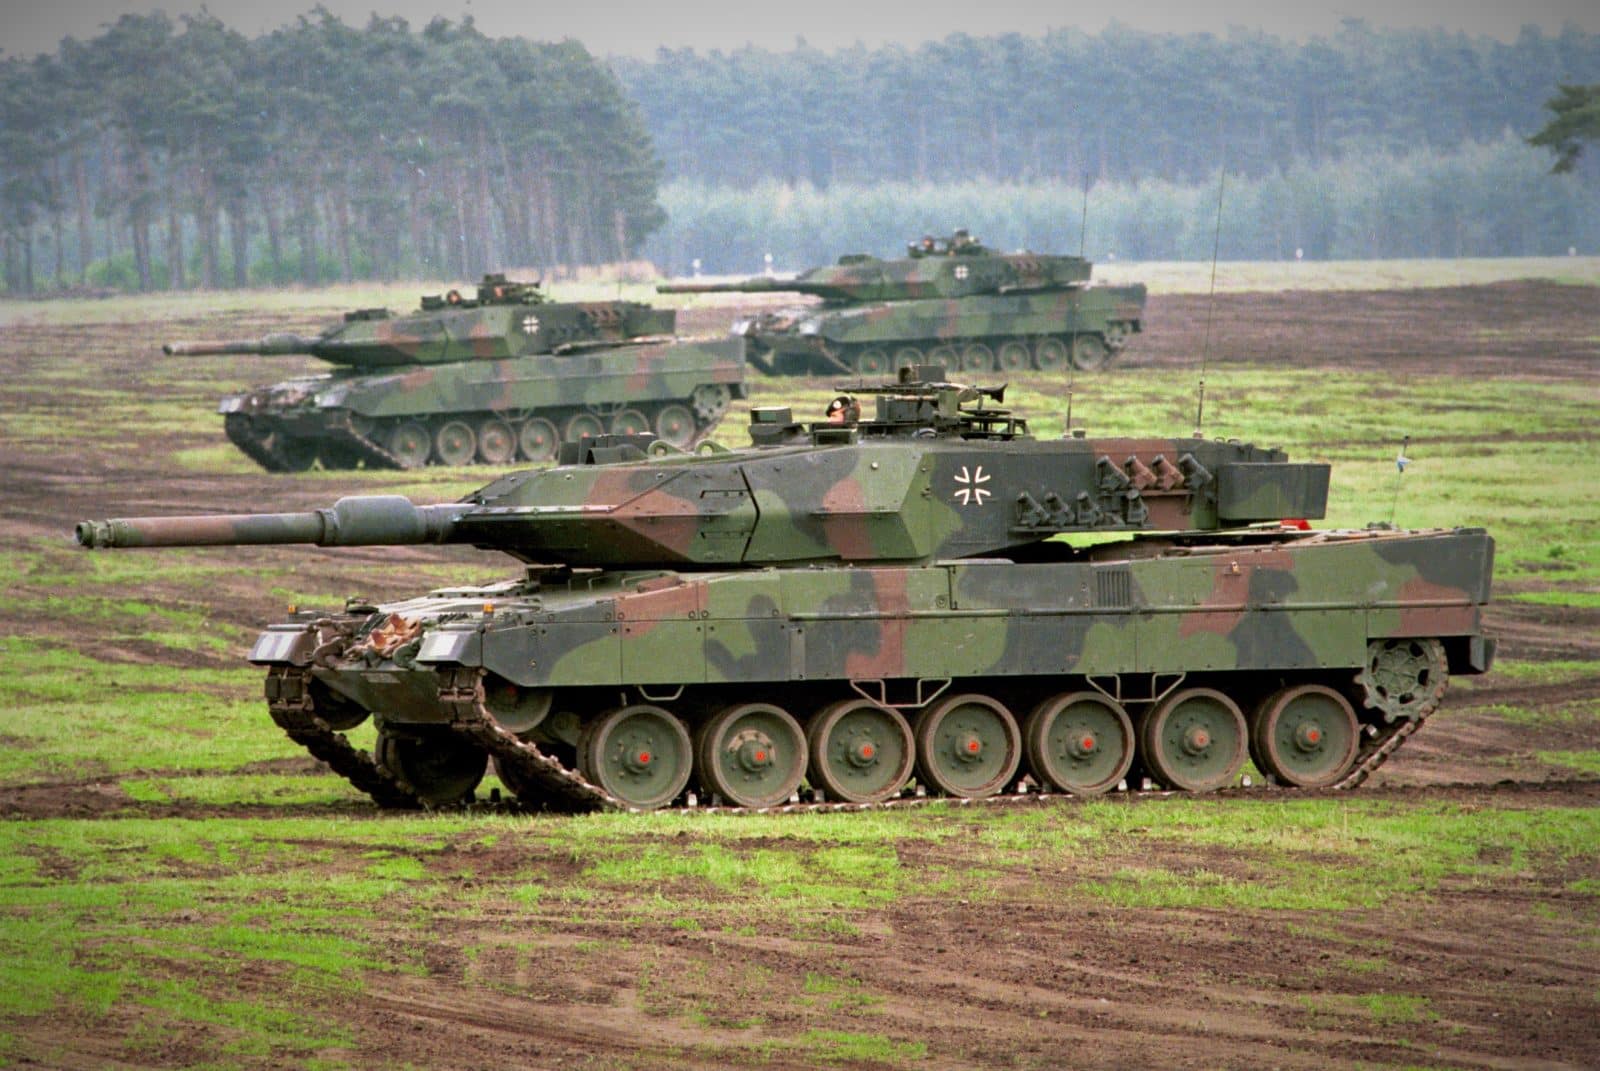 European Parliament officially called on Germany to transfer Leopard 2 tanks to Ukraine